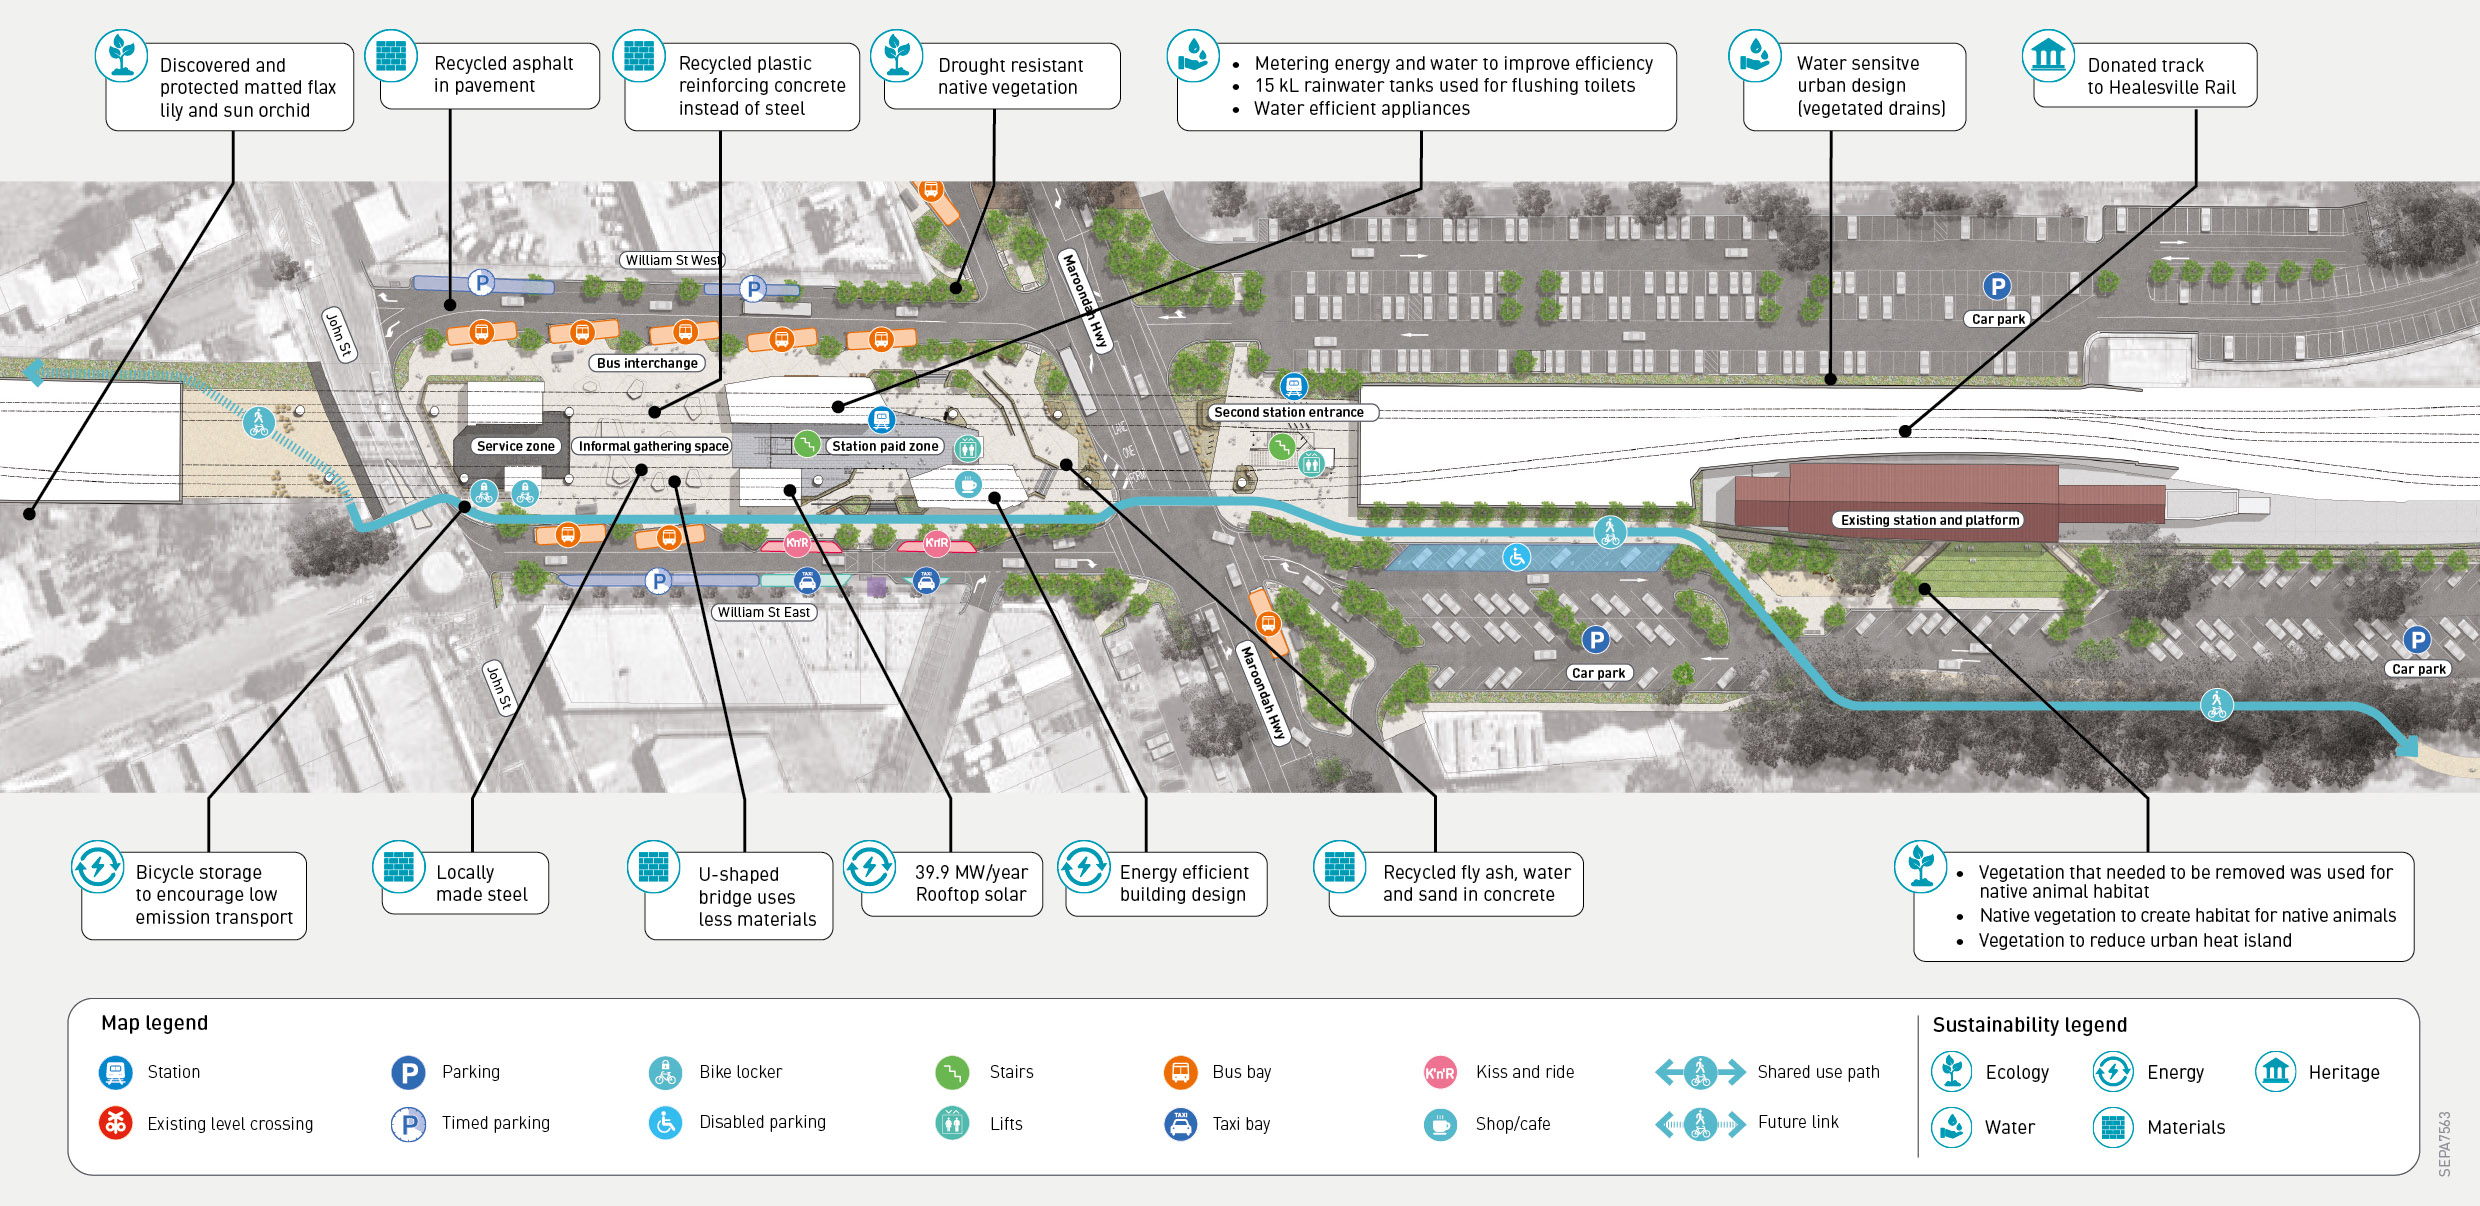 Map of sustainable practices in Lilydale Station precinct.